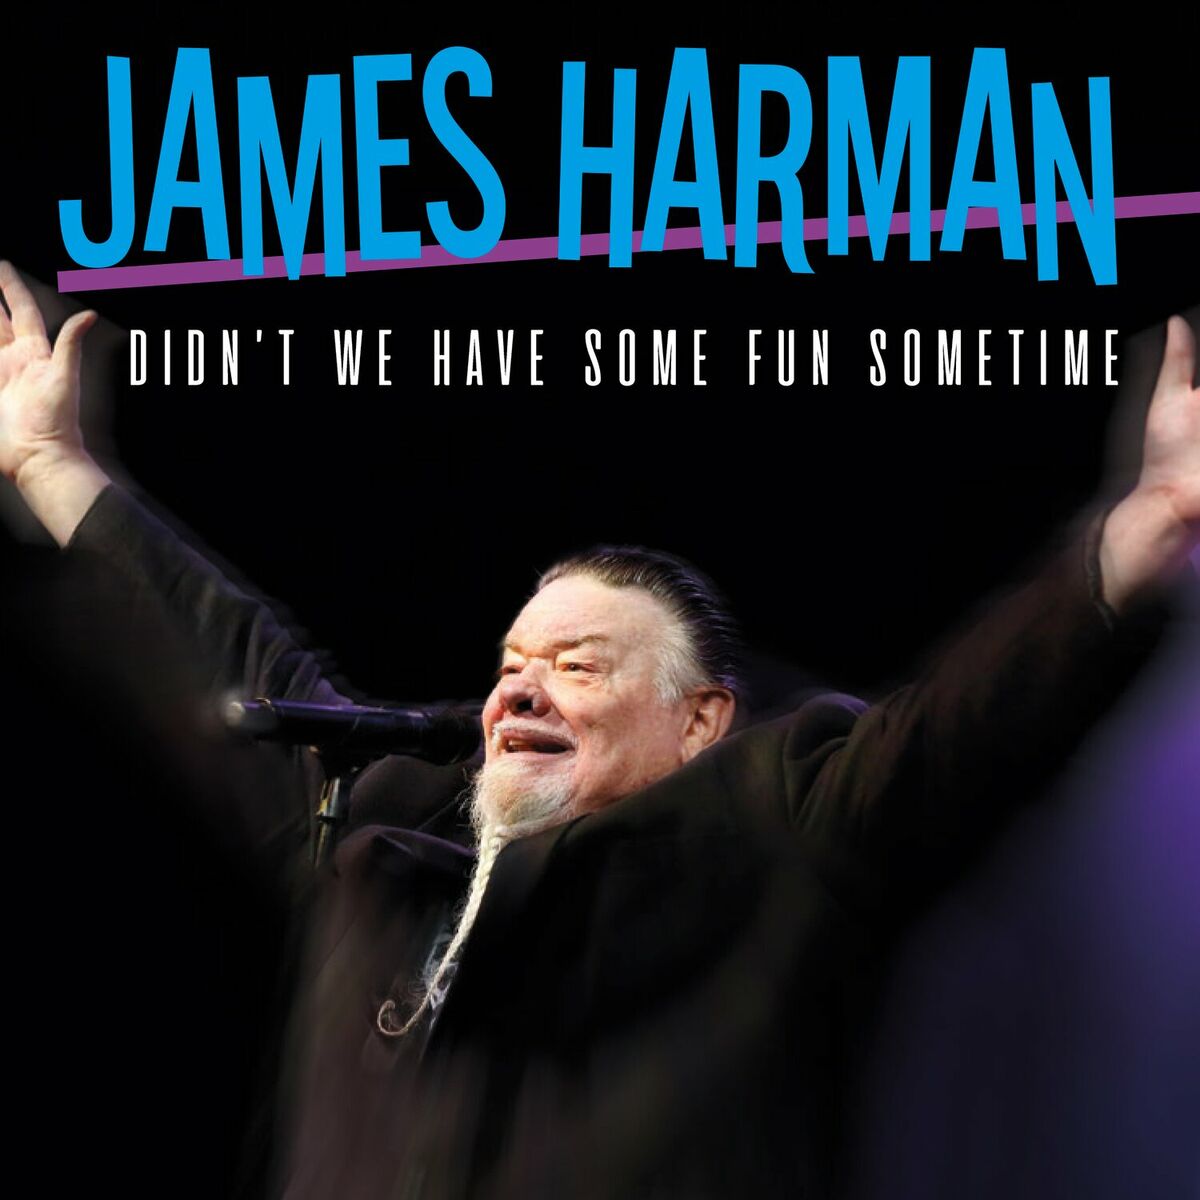 Review: James Harman - Didn't We Have Some Fun Sometime